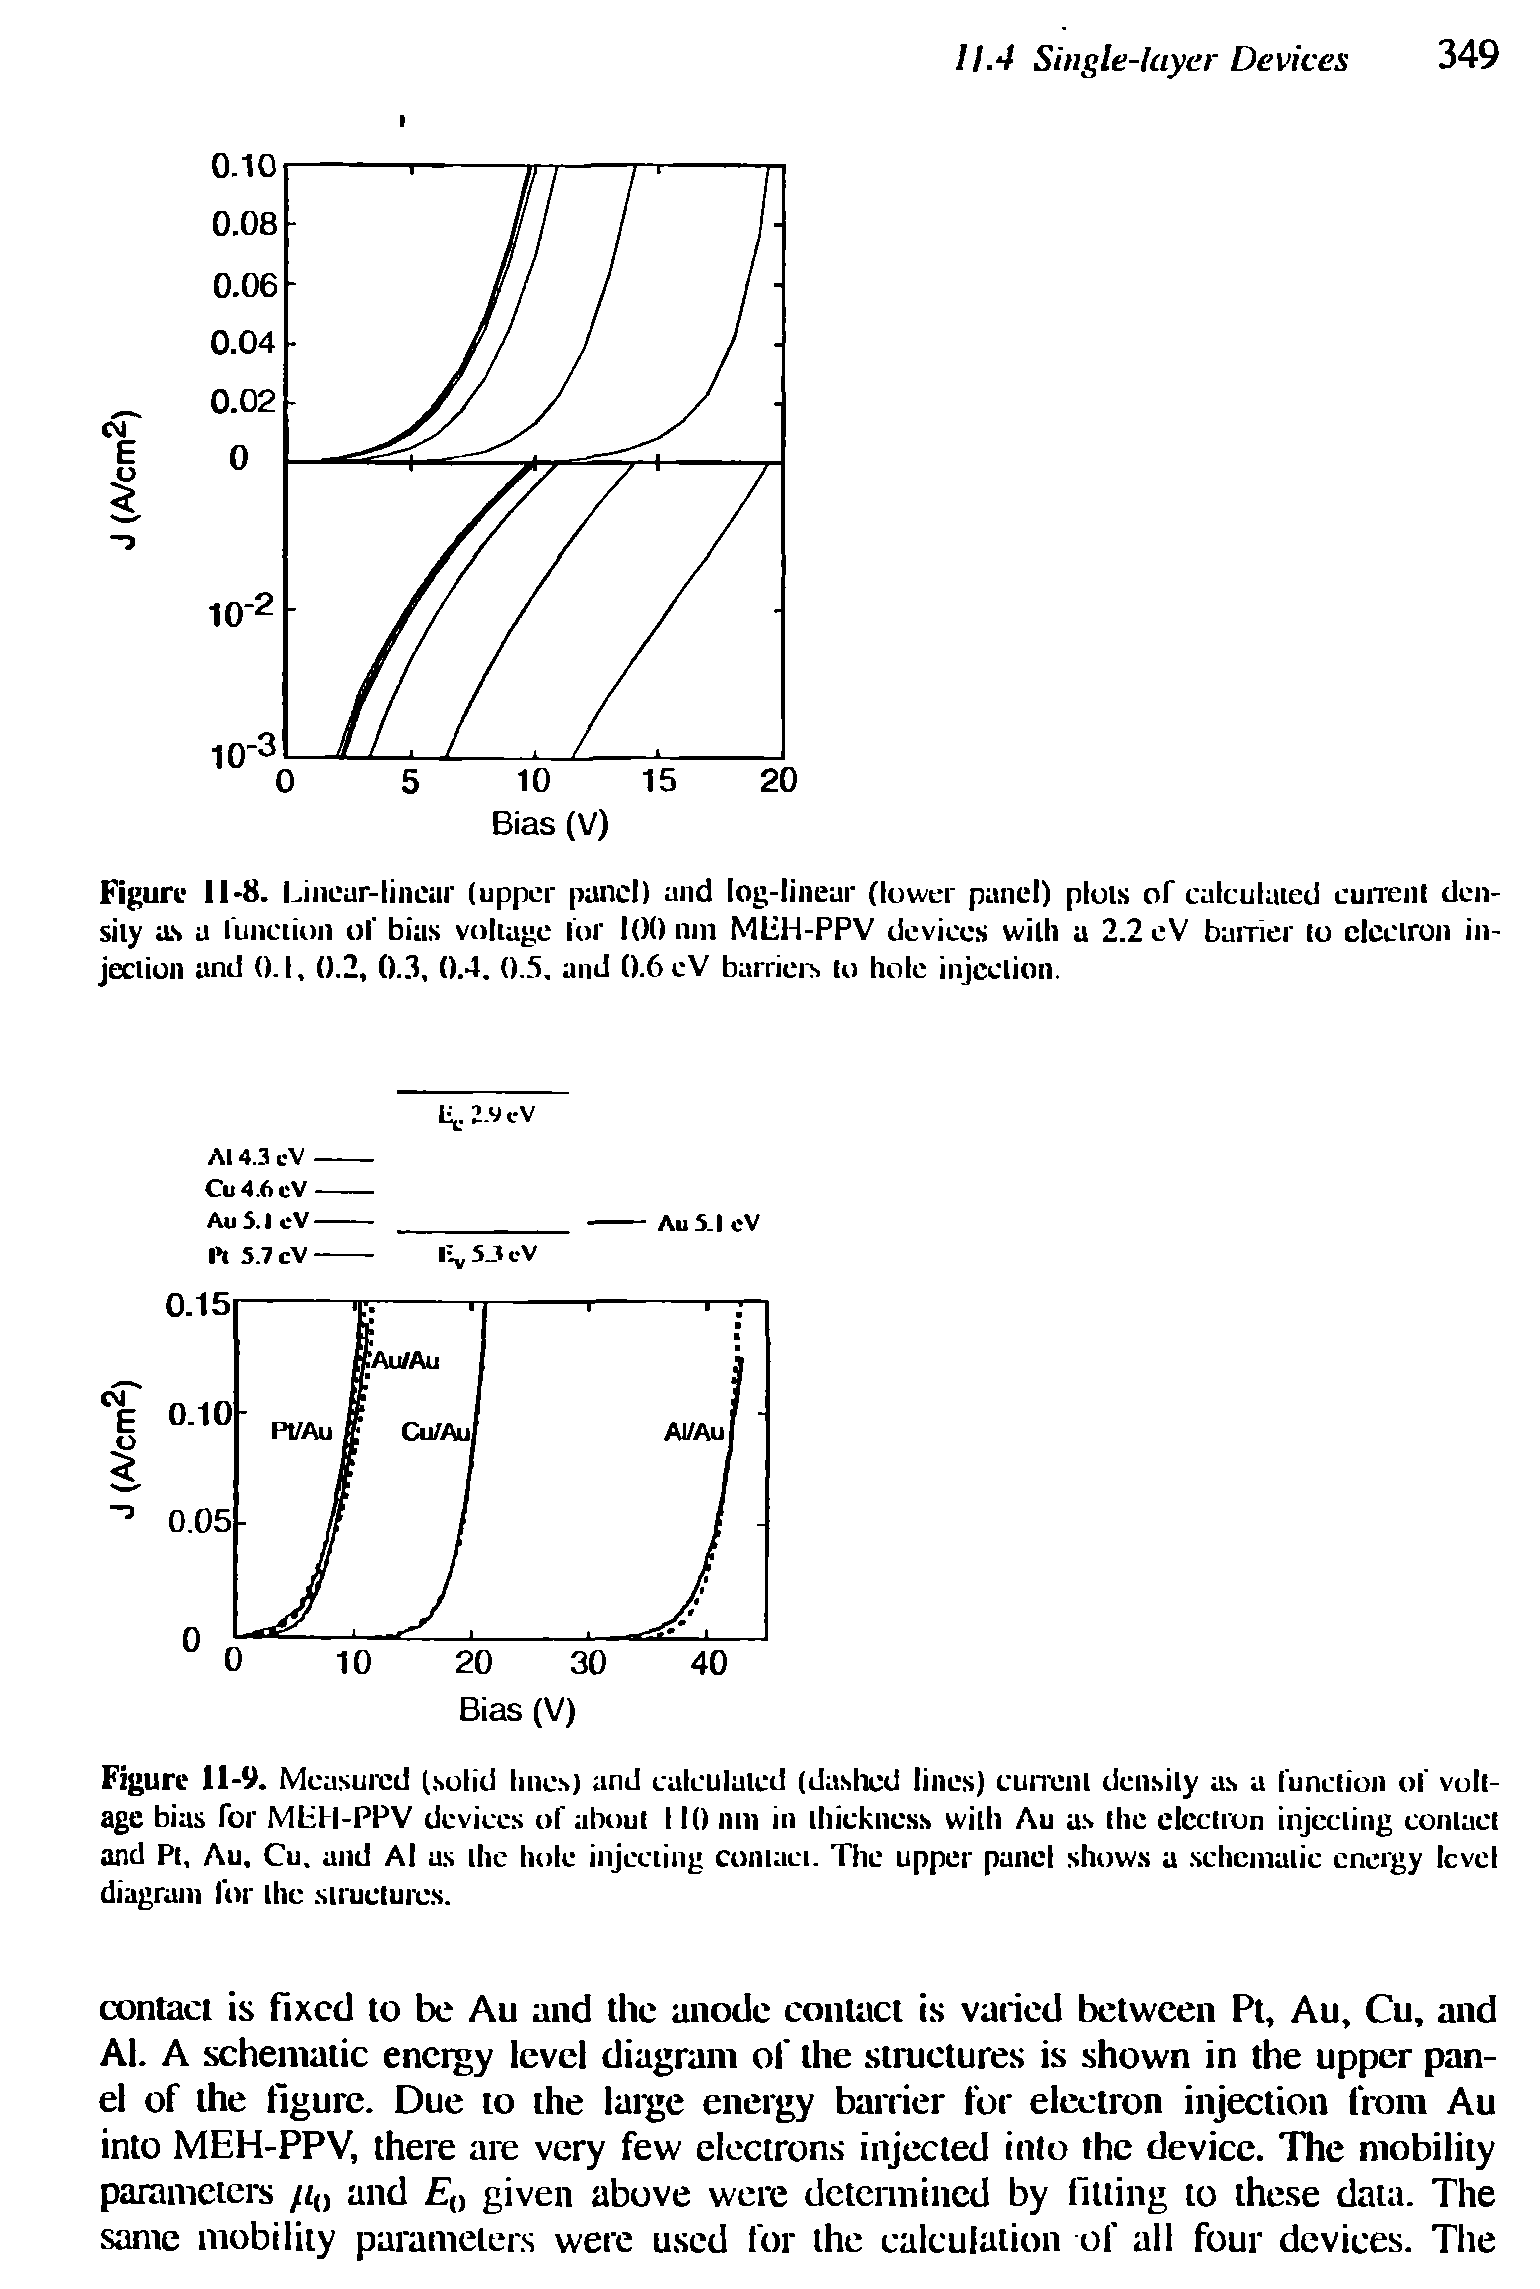 Figure 11-8. Linear-linear (upper panel) and log-linear (lower panel) plots of calculated current density as a (unction of bias voltage for 100 nm MliH-PPV devices with a 2.2 eV barrier to electron injection and 0.1, 0.2, 0.3, 0.4. 0.5. and 0.6 eV barriers to hole injection.